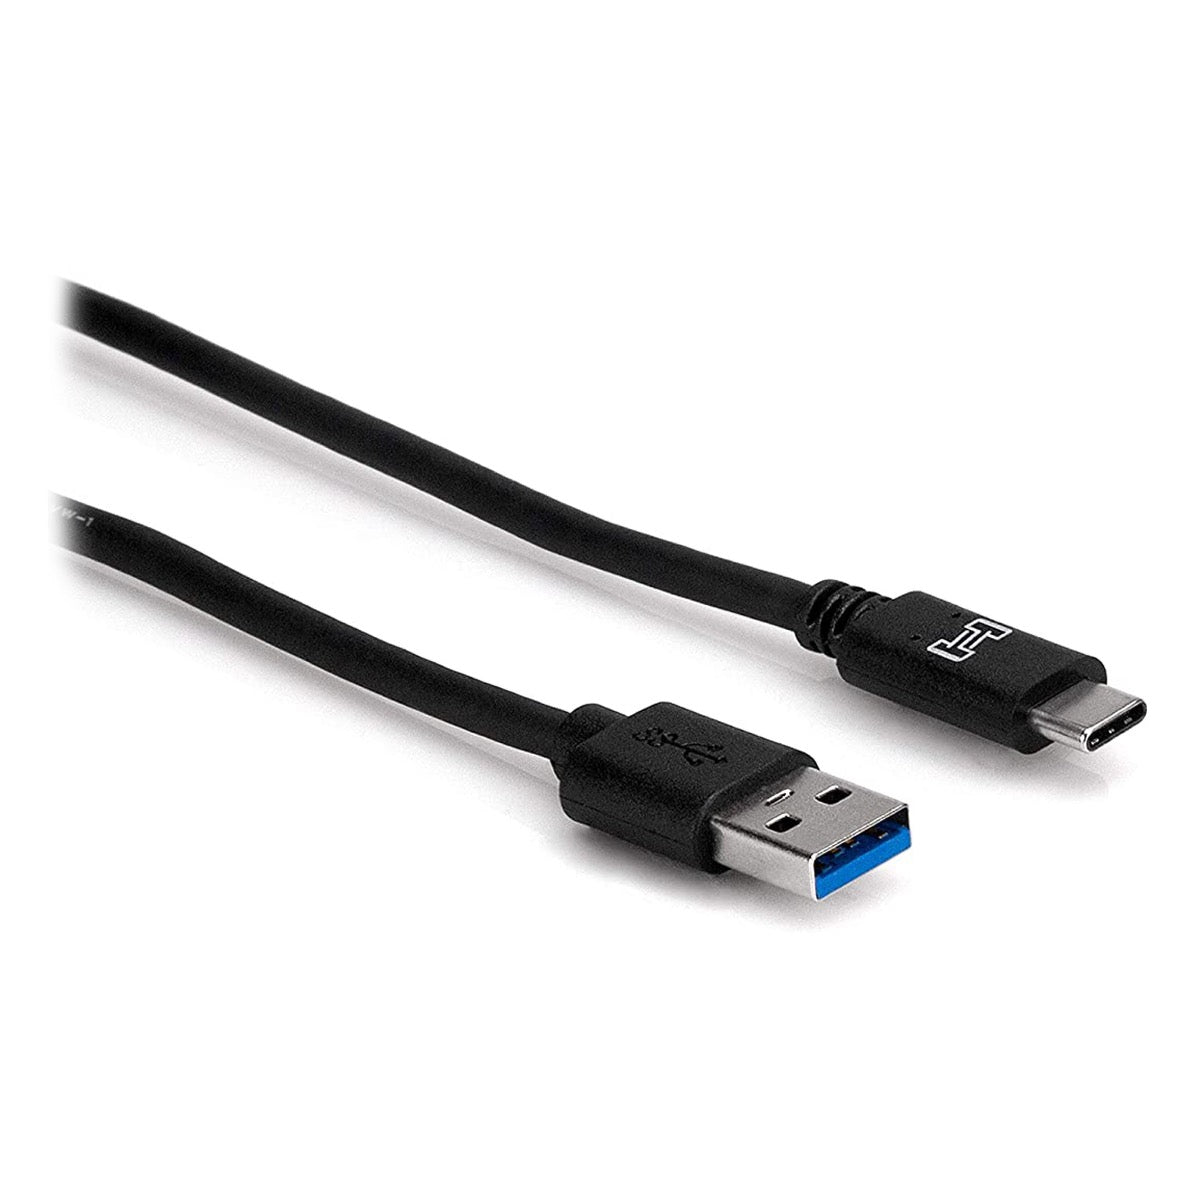 Hosa USB-306CA SuperSpeed 3.0 Type A to Type C USB Cable, 6-Feet